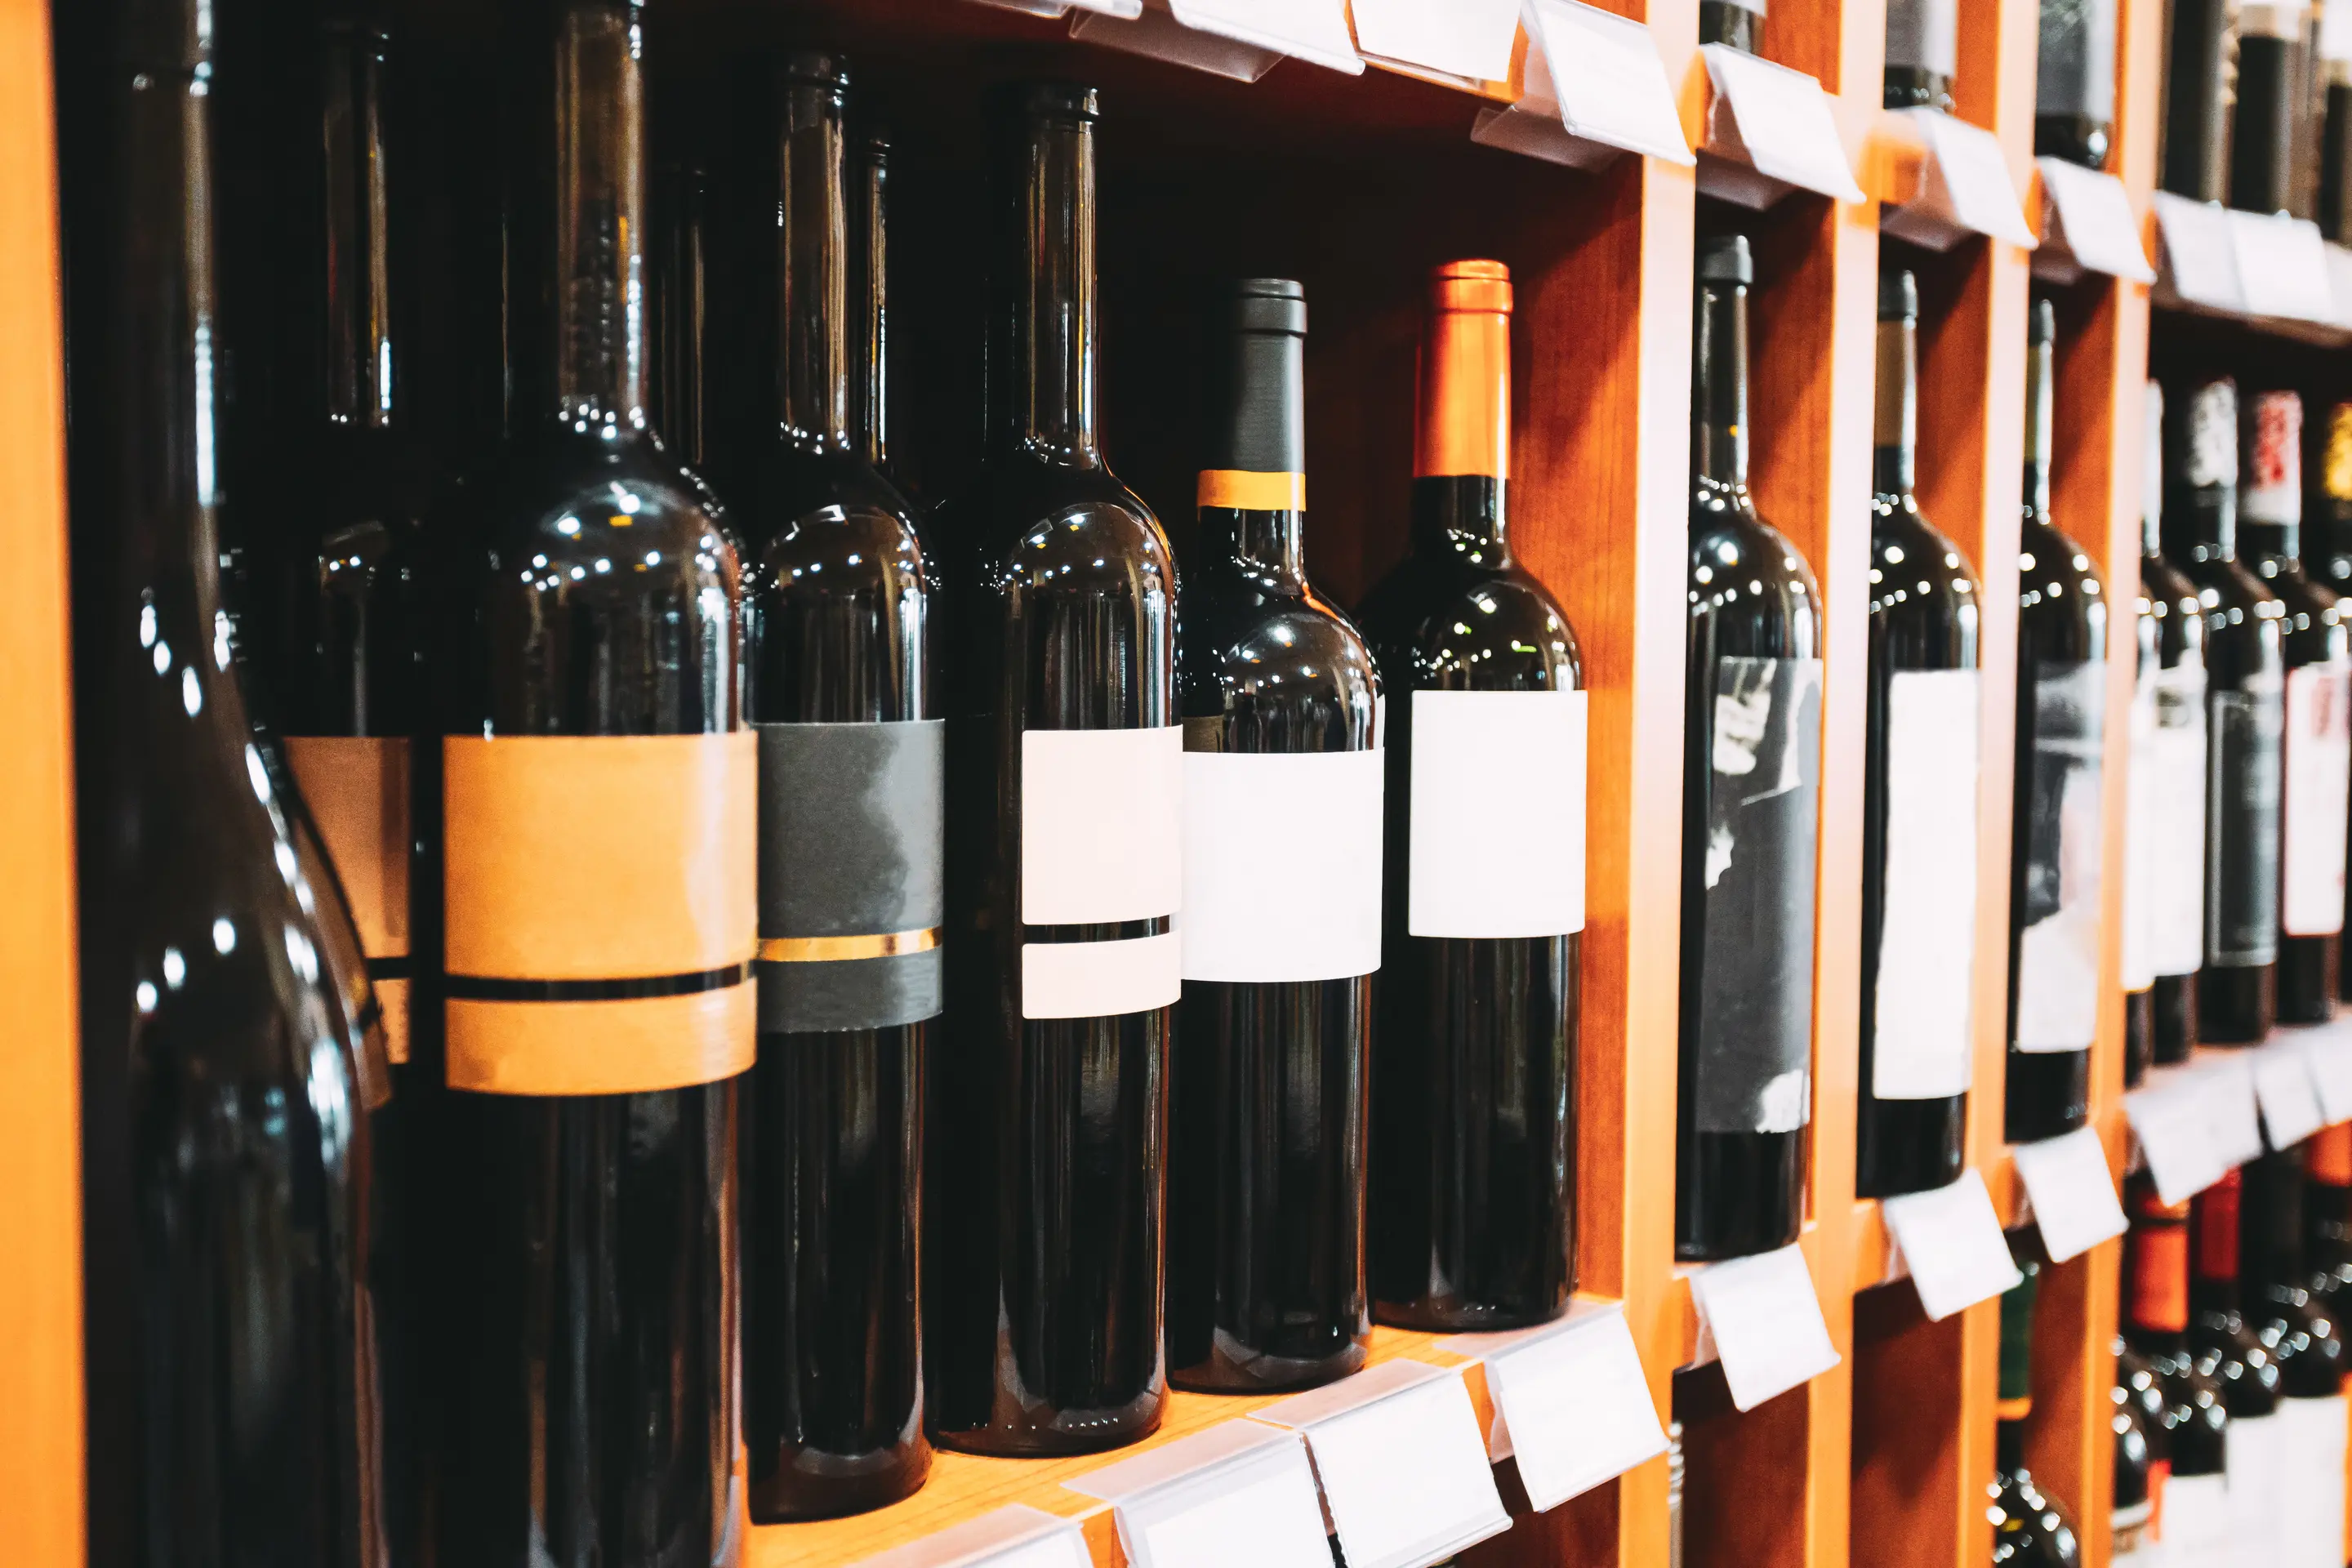 A store shelf with bottles of wine and price tags